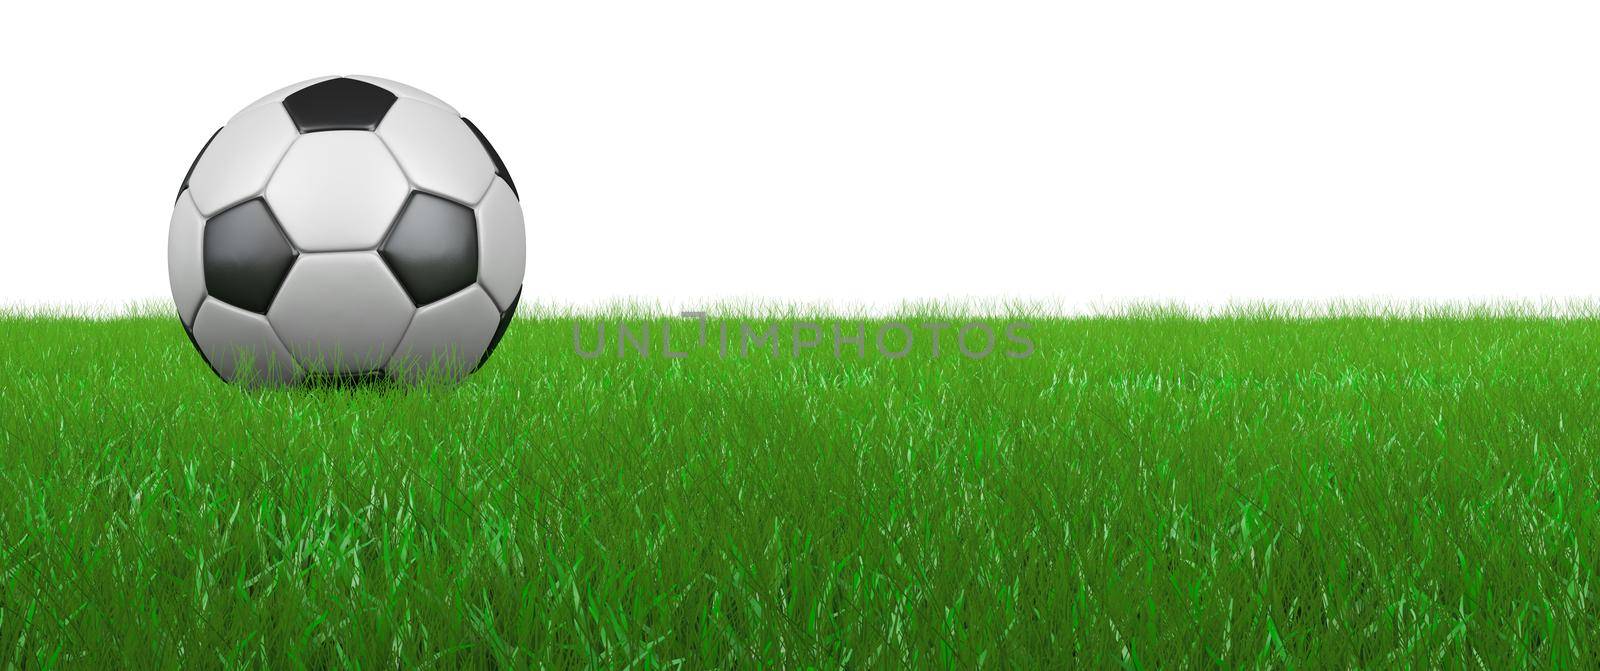 Soccer ball on the grass, on a white background. 3D render.